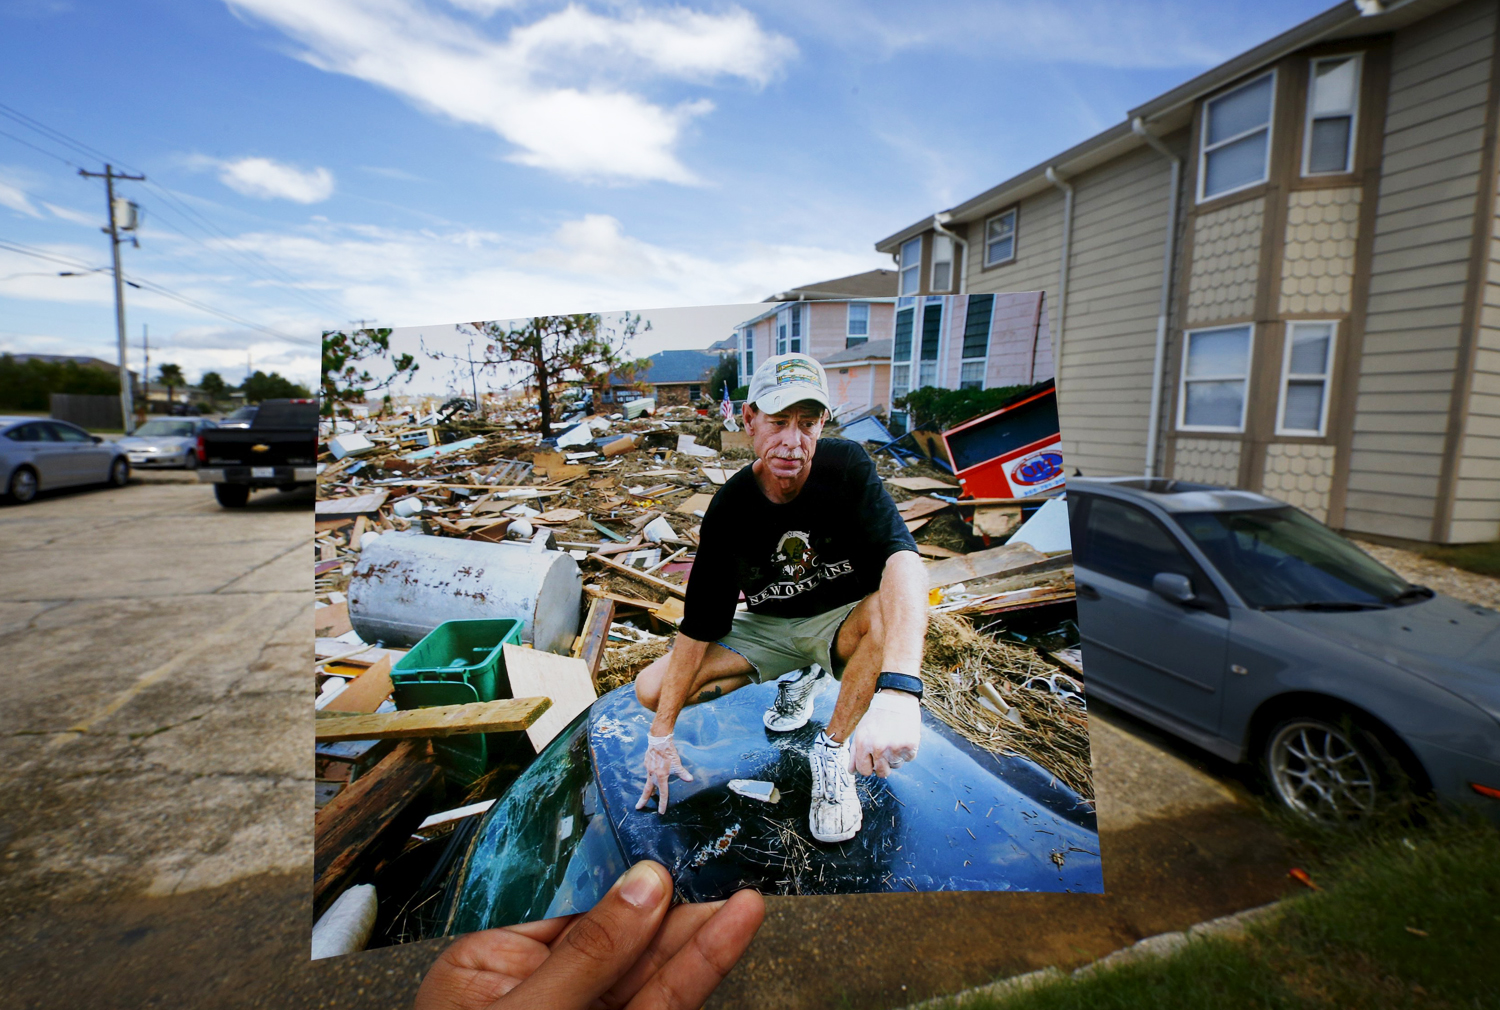 Resident Michael Rehage squats on the roof of his car on September 12, 2005, after Hurricane Katrina struck.